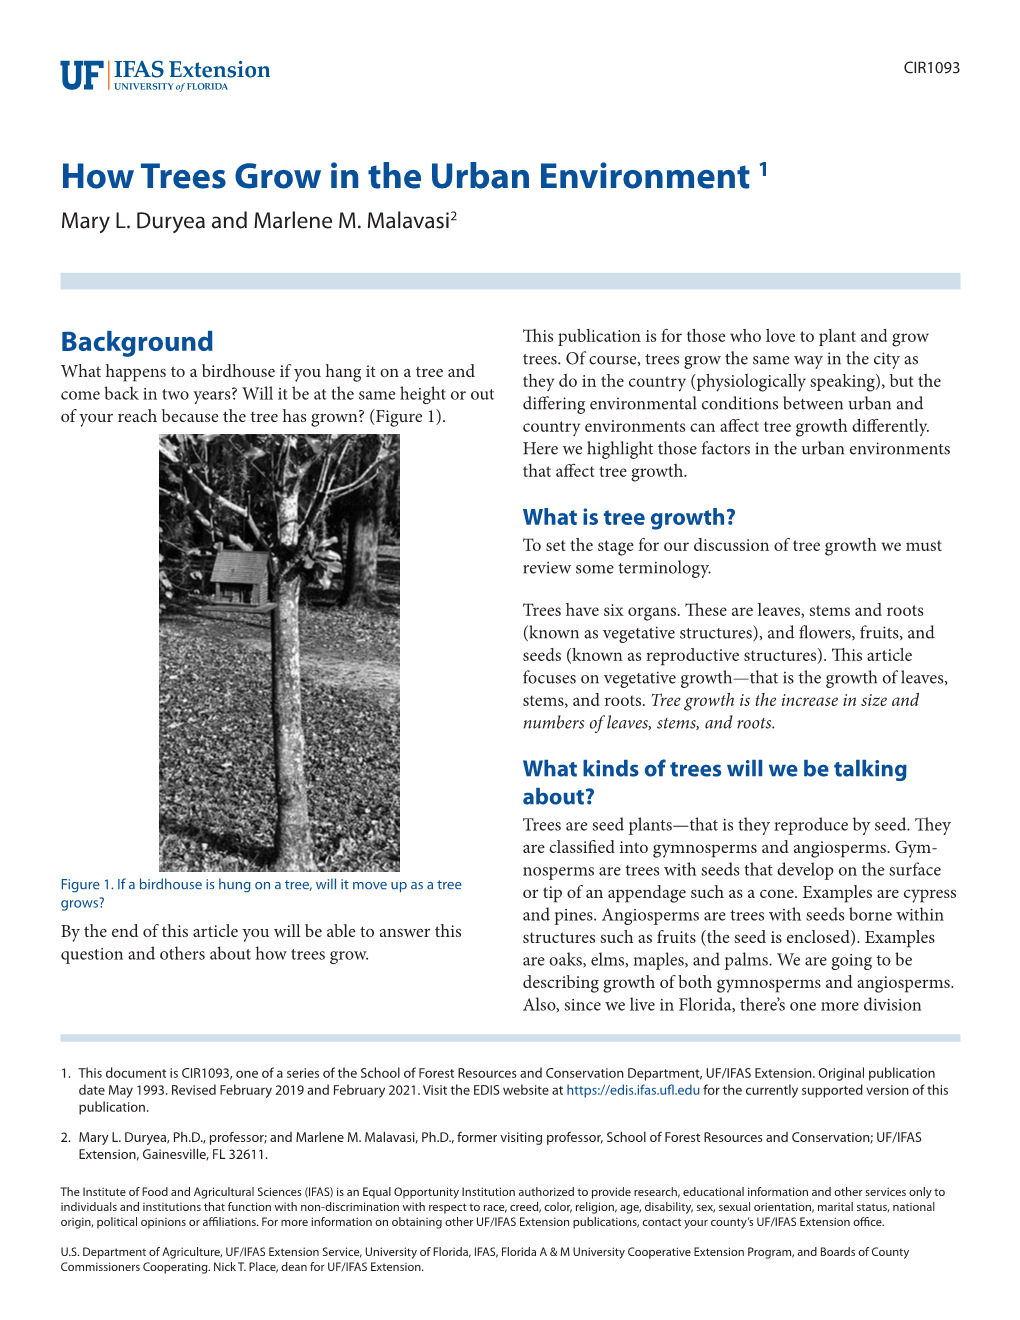 How Trees Grow in the Urban Environment 1 Mary L